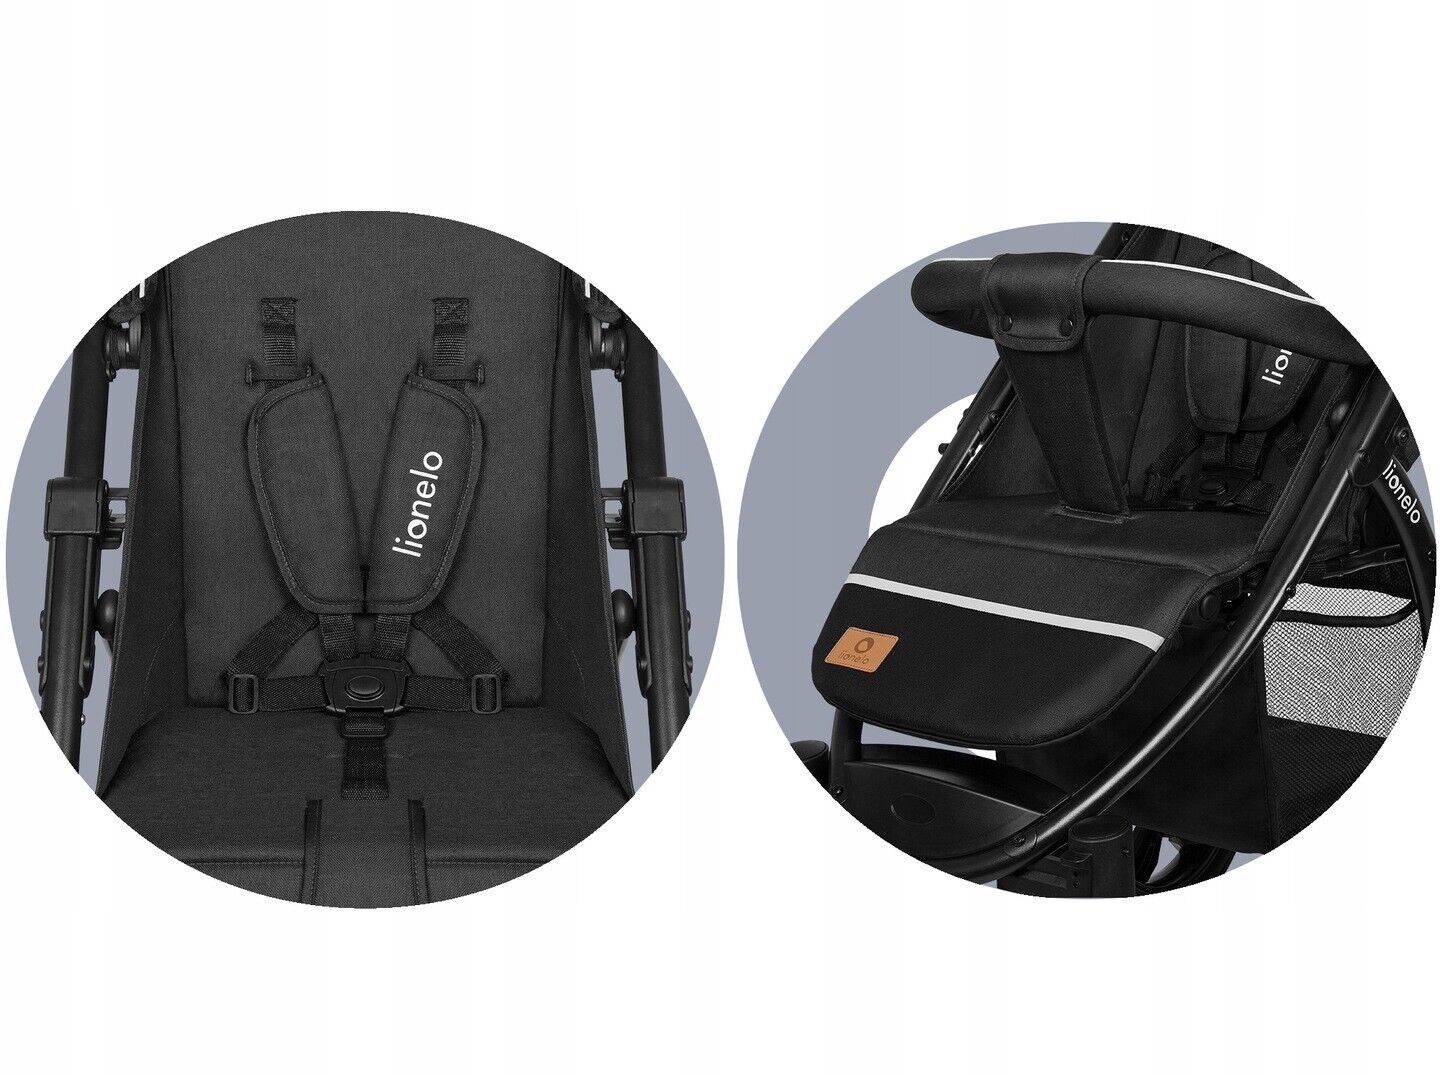 Annet Tour Lionelo Black Carbon Baby Compact Stroller Buggy Pushchair Footmuff